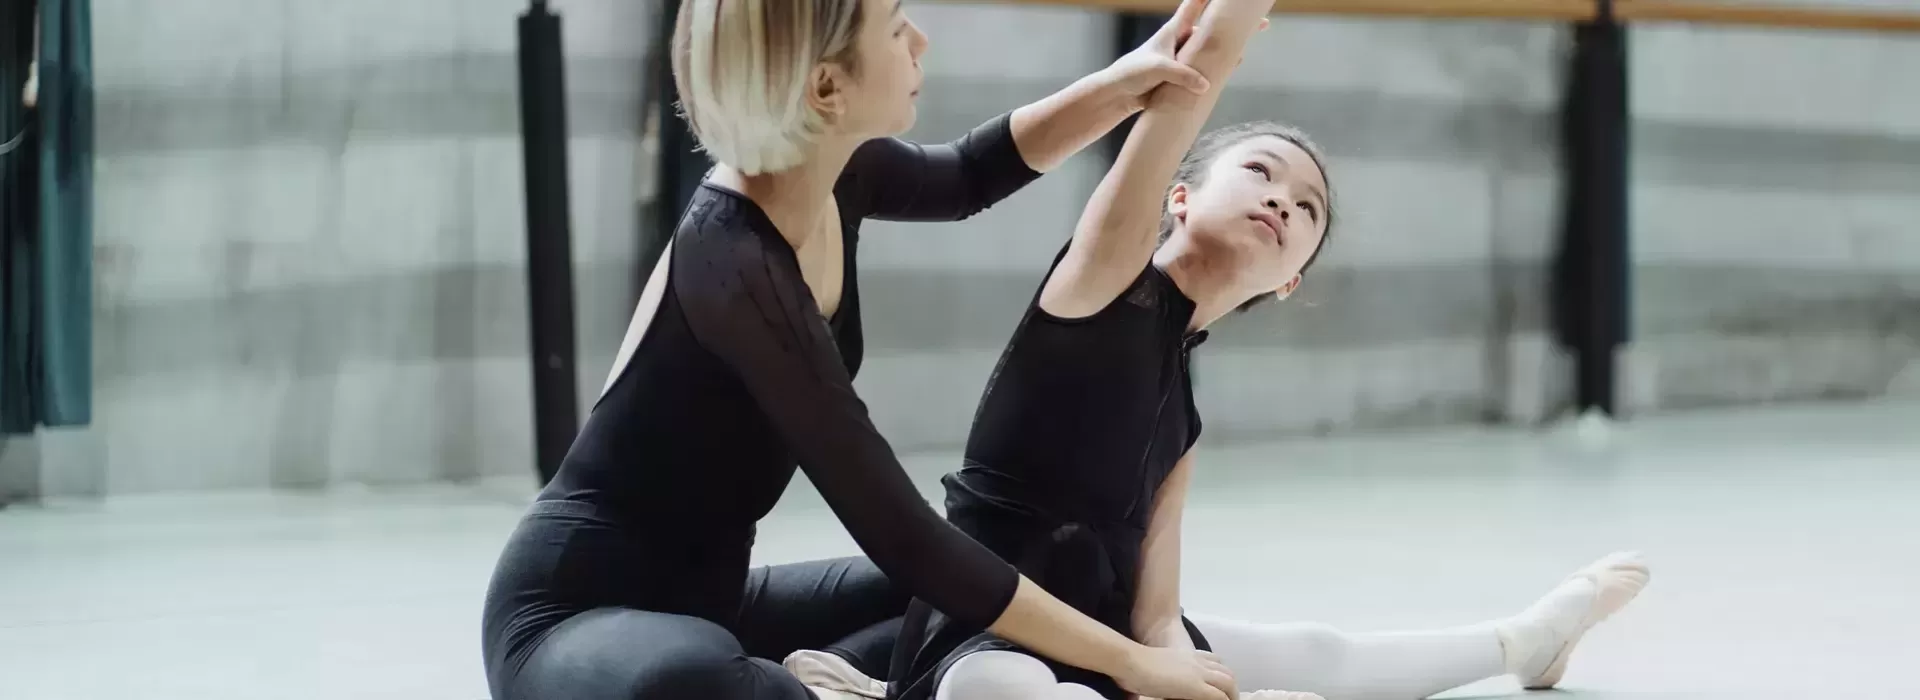 Ballet teacher sat on floor with child student helping her with a pose